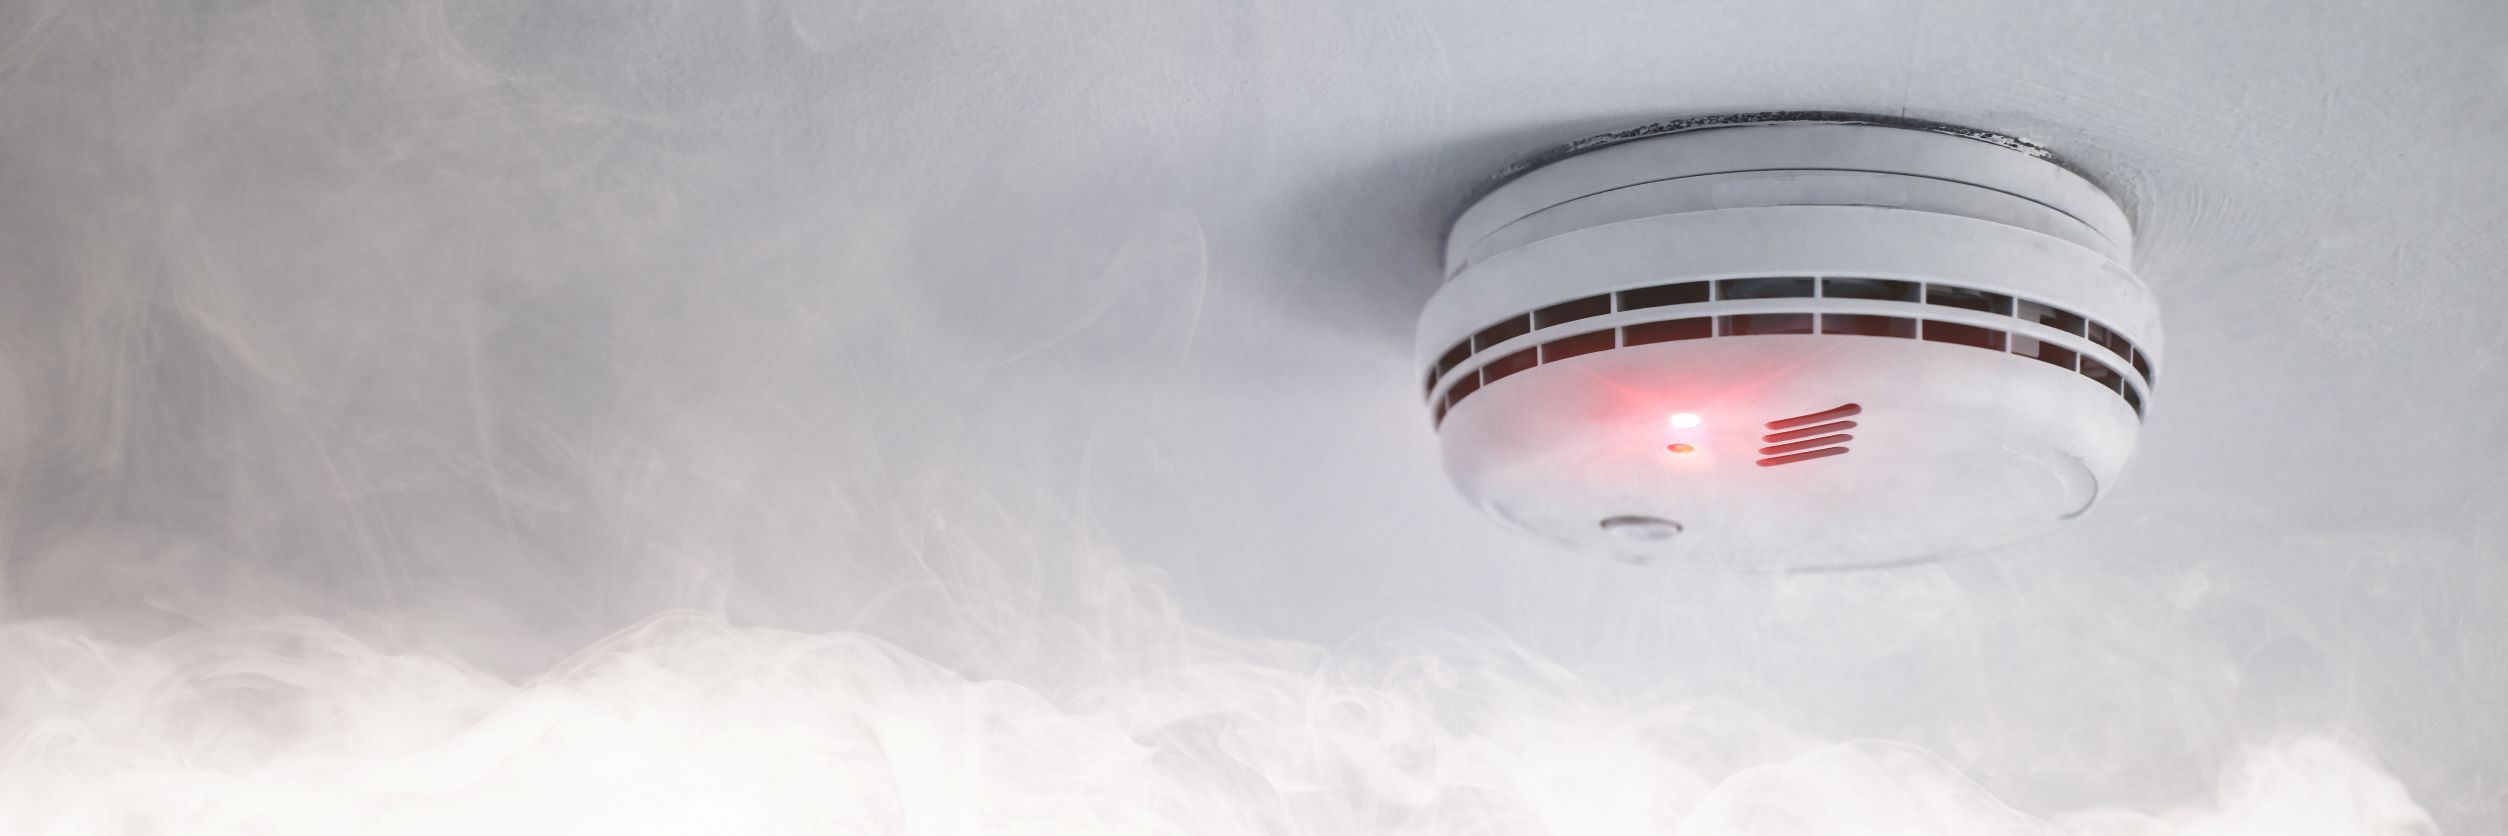 Is It Time To Get Your Fire Alarm Replaced?